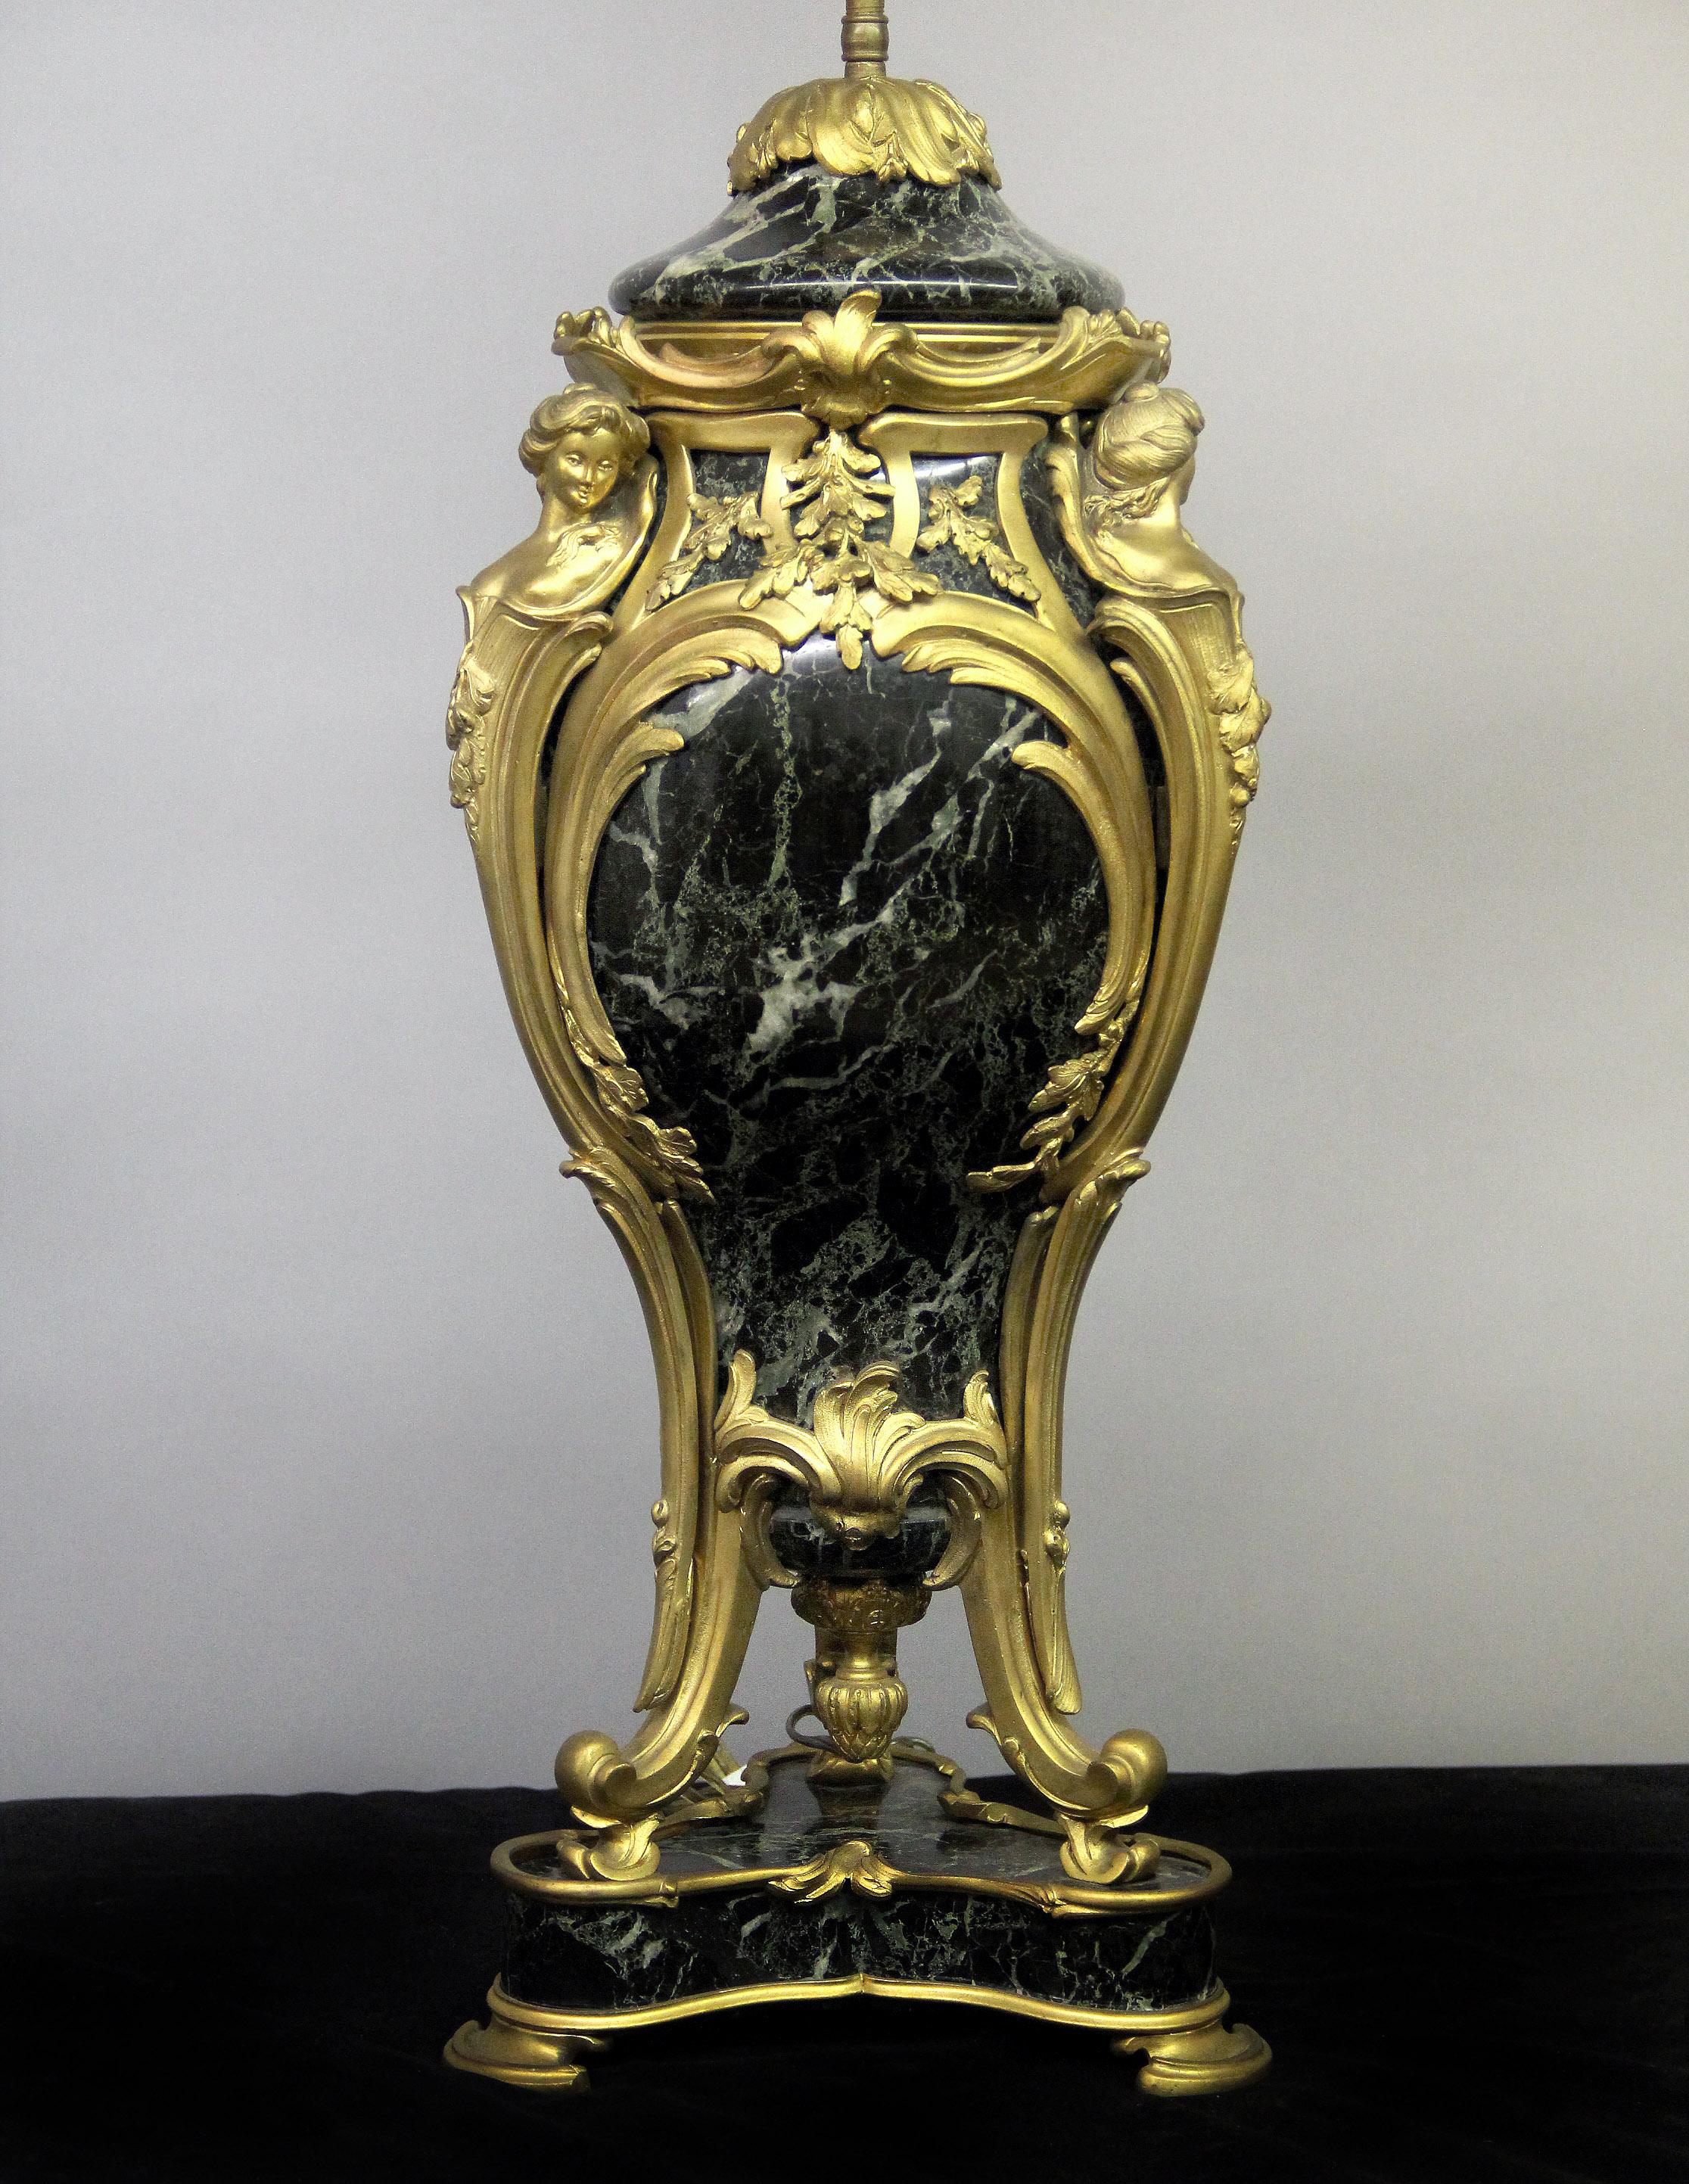 An impressive late 19th century gilt bronze mounted three-light marble lamp

The Verde green marble with bronze foliage designs, the corners with three lady busts leading down to scrolling legs on a marble base and bronze feet.

Measures: Total